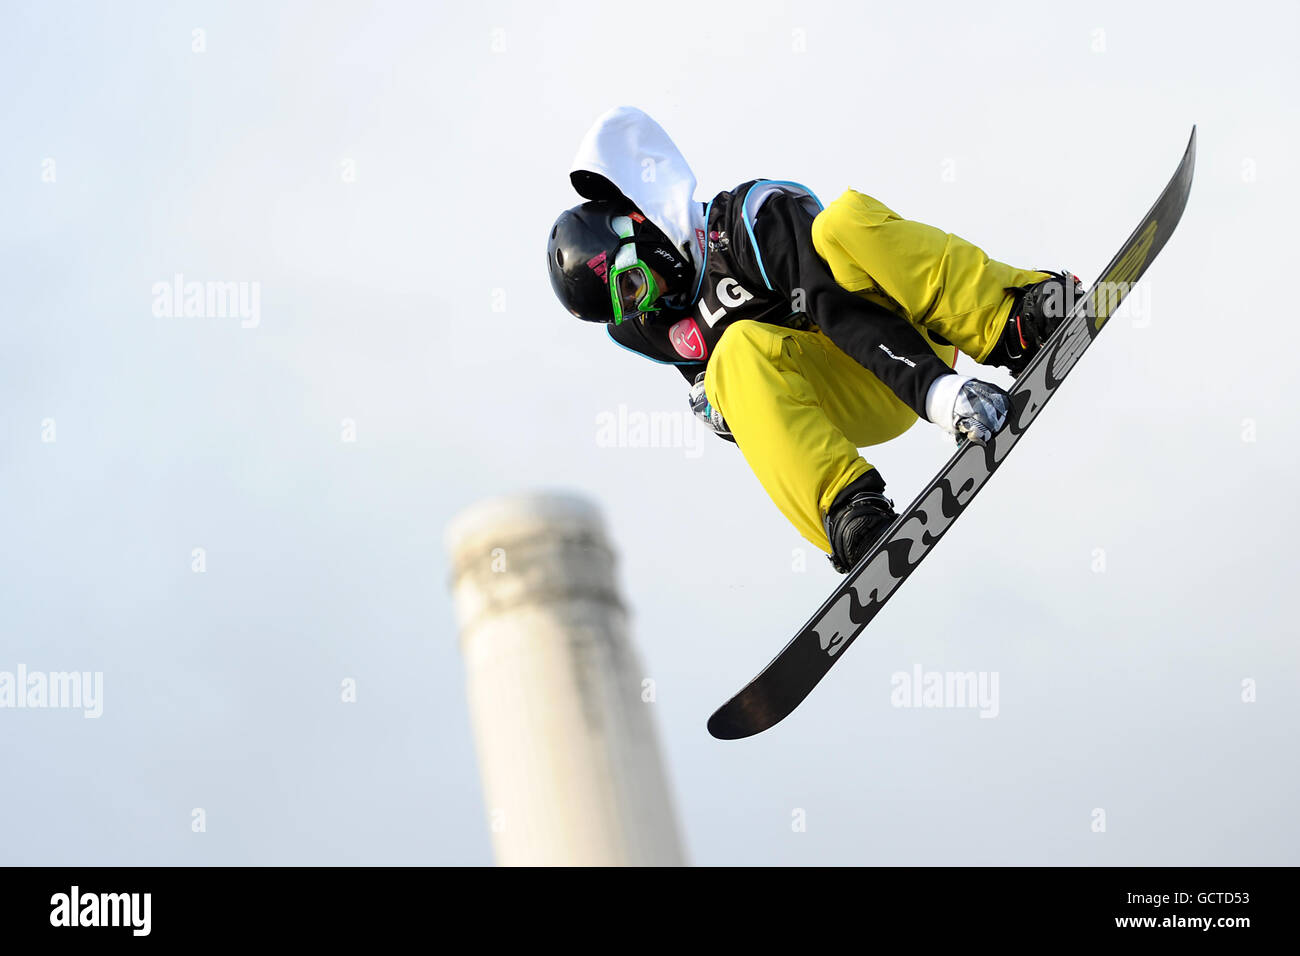 Mathias Weissenbacher of Austria during the LG Snowboard FIS World Cup in London Stock Photo